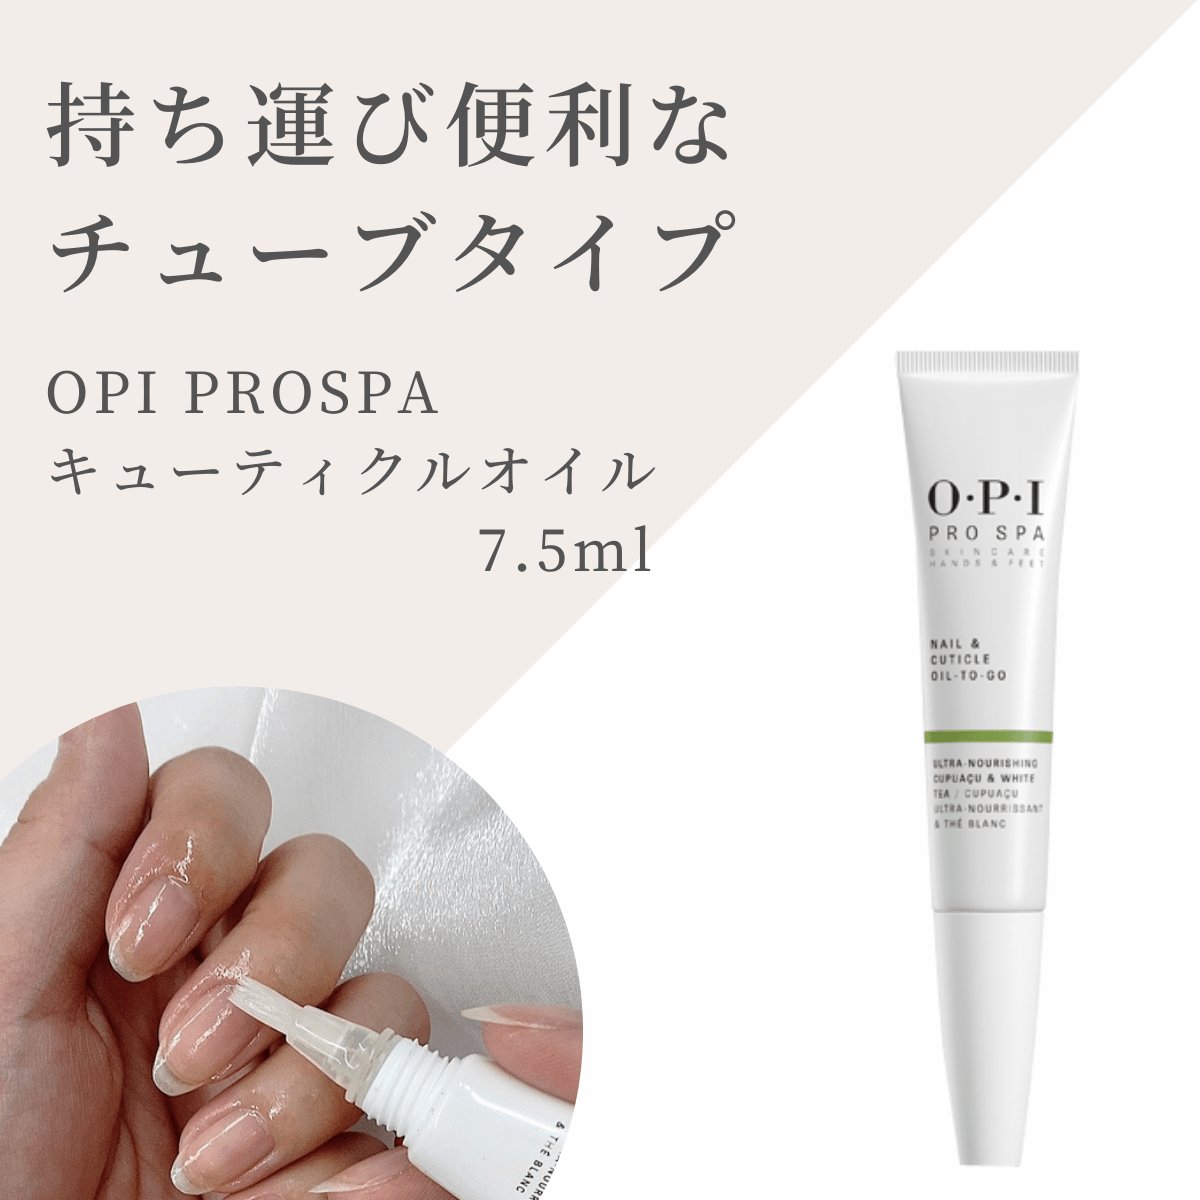 OPI oil to go 新品未使用品 - その他